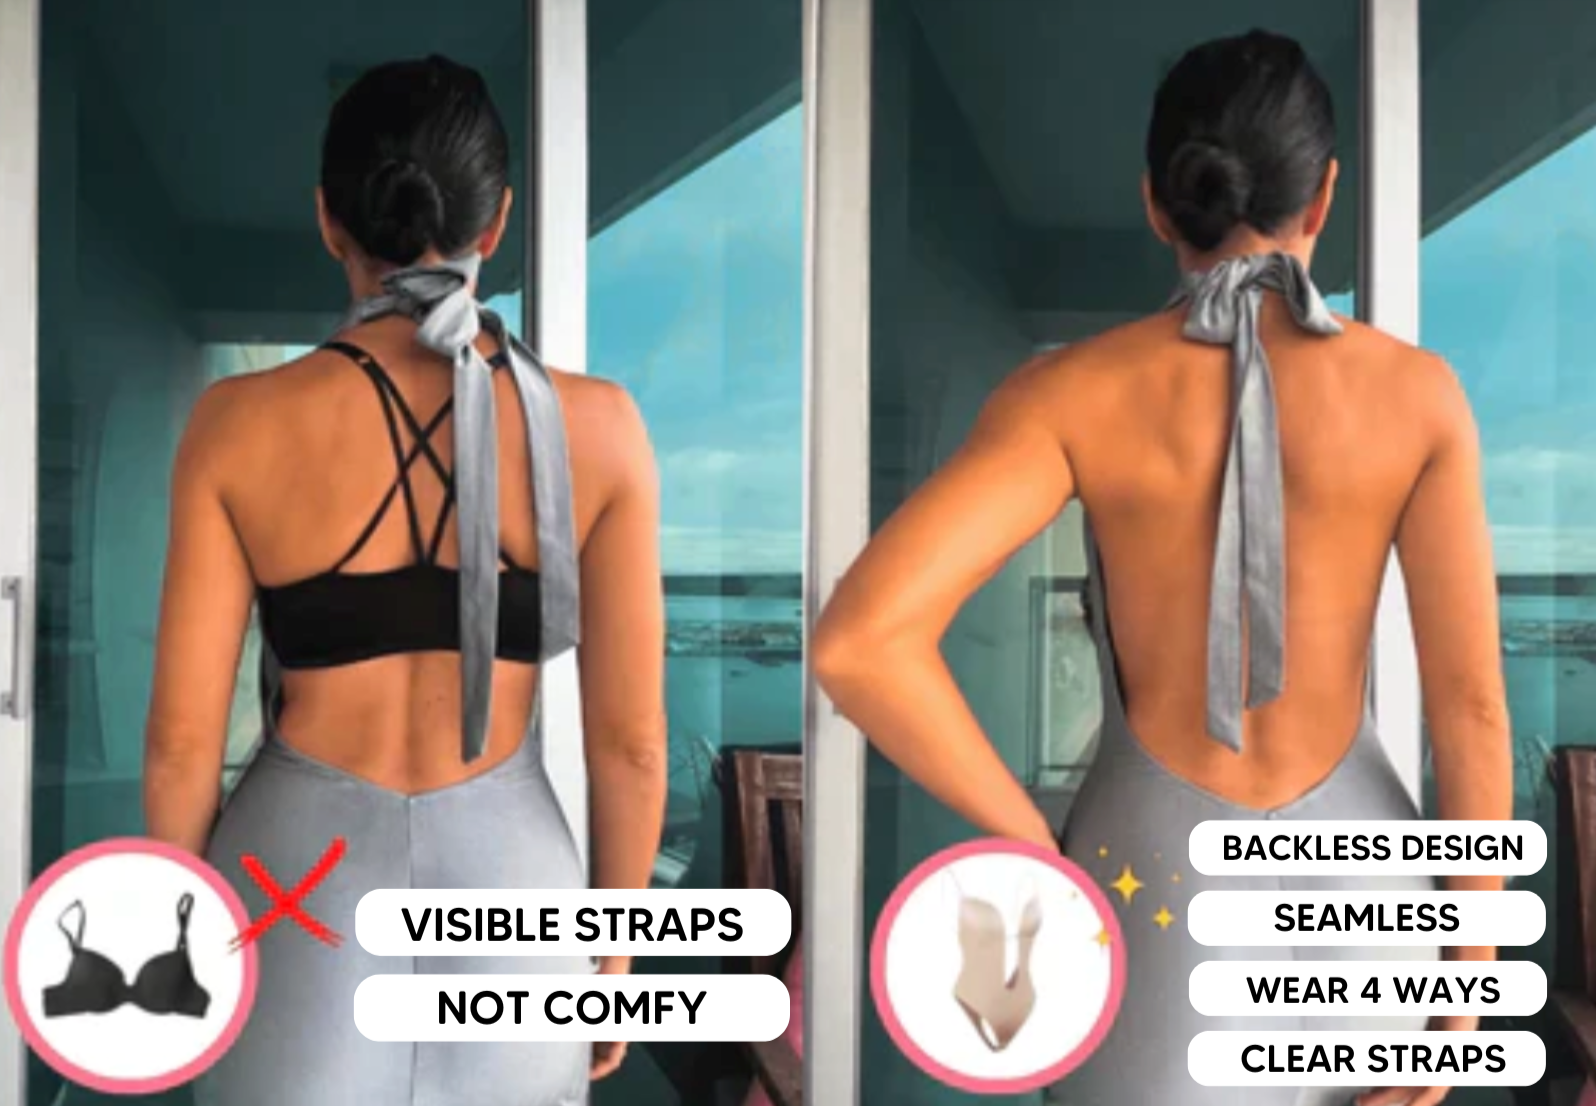 Did you know you could do this with our backless body bra